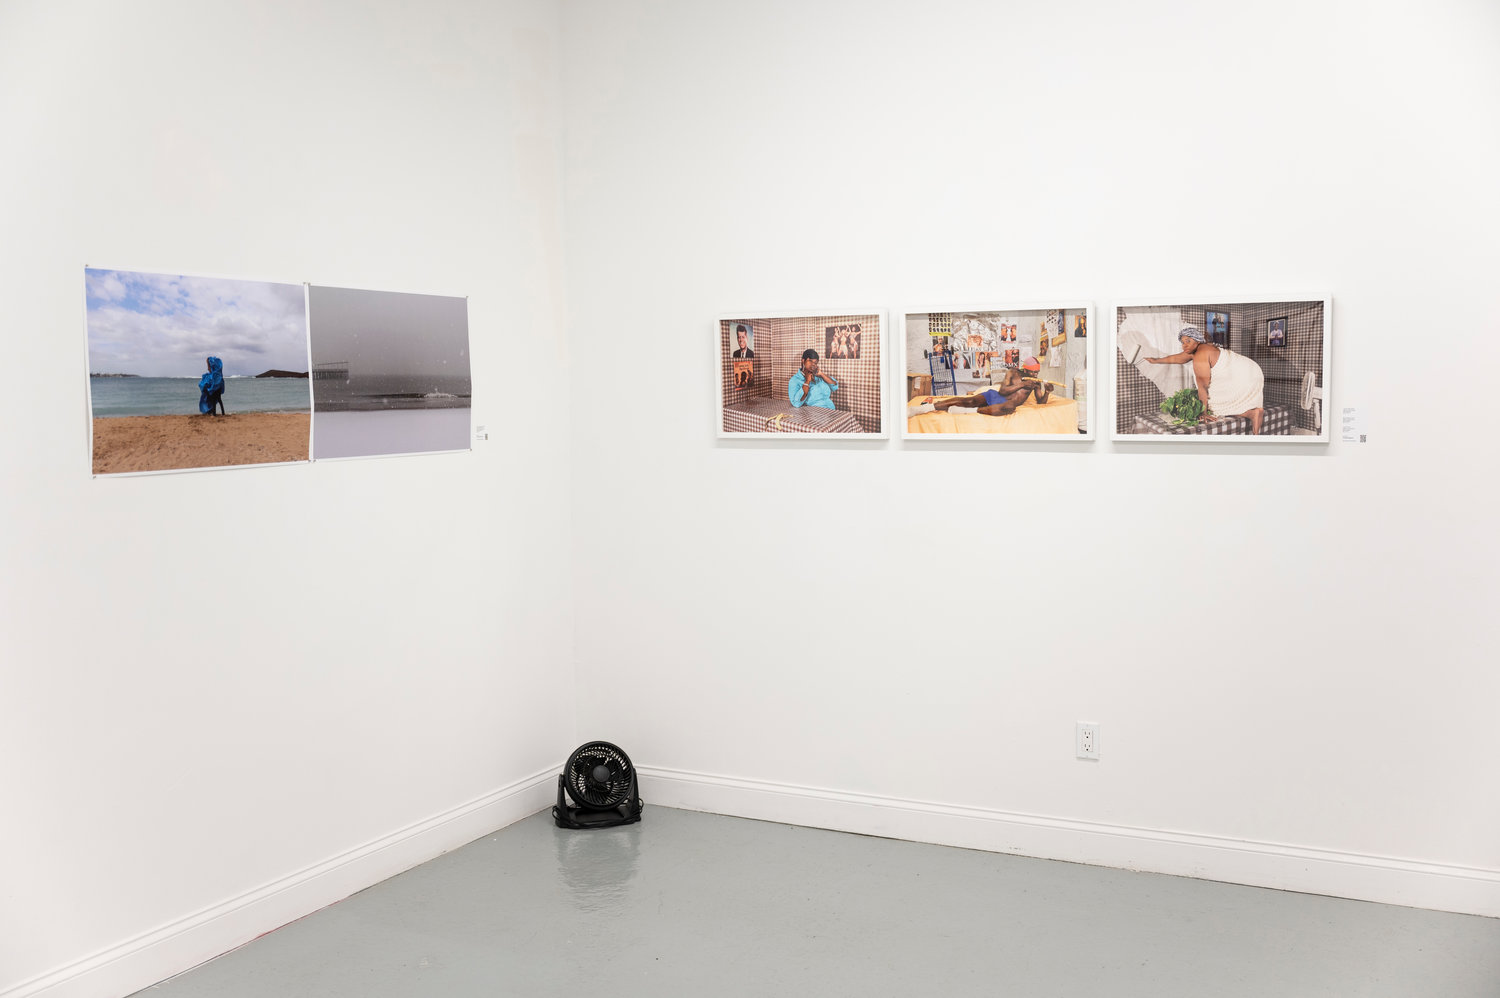 The exhibit ‘In Between Yesterday, Today and Tomorrow’ was open throughout June by appointment in the South Bronx. Now that the viewing period is over, the photographs will travel to some of the SUNY schools while two photographers will be chosen to be featured in Portland, Oregon’s Blue Sky Gallery.